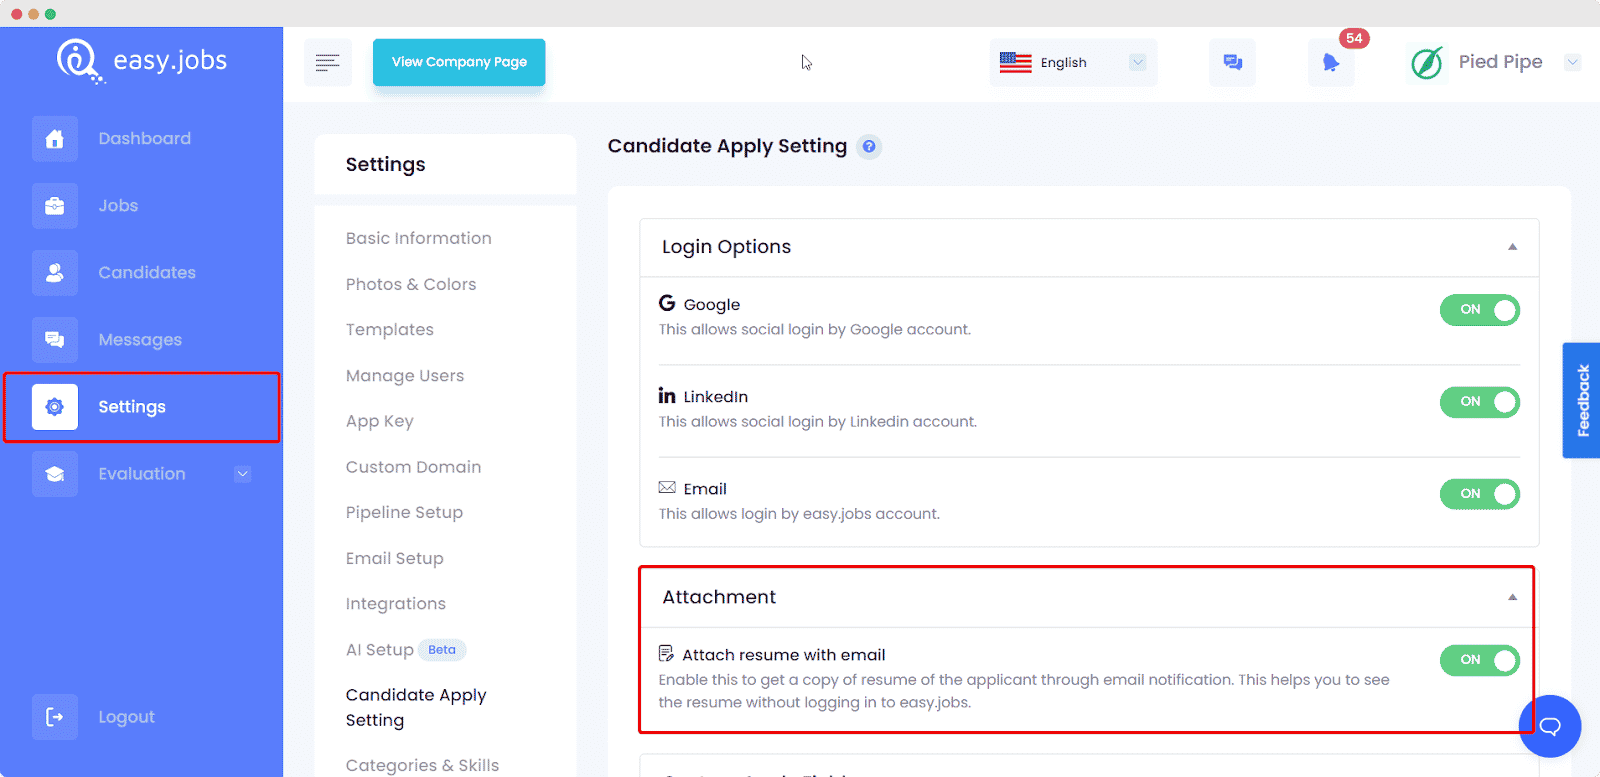 Candidate Apply Settings 5